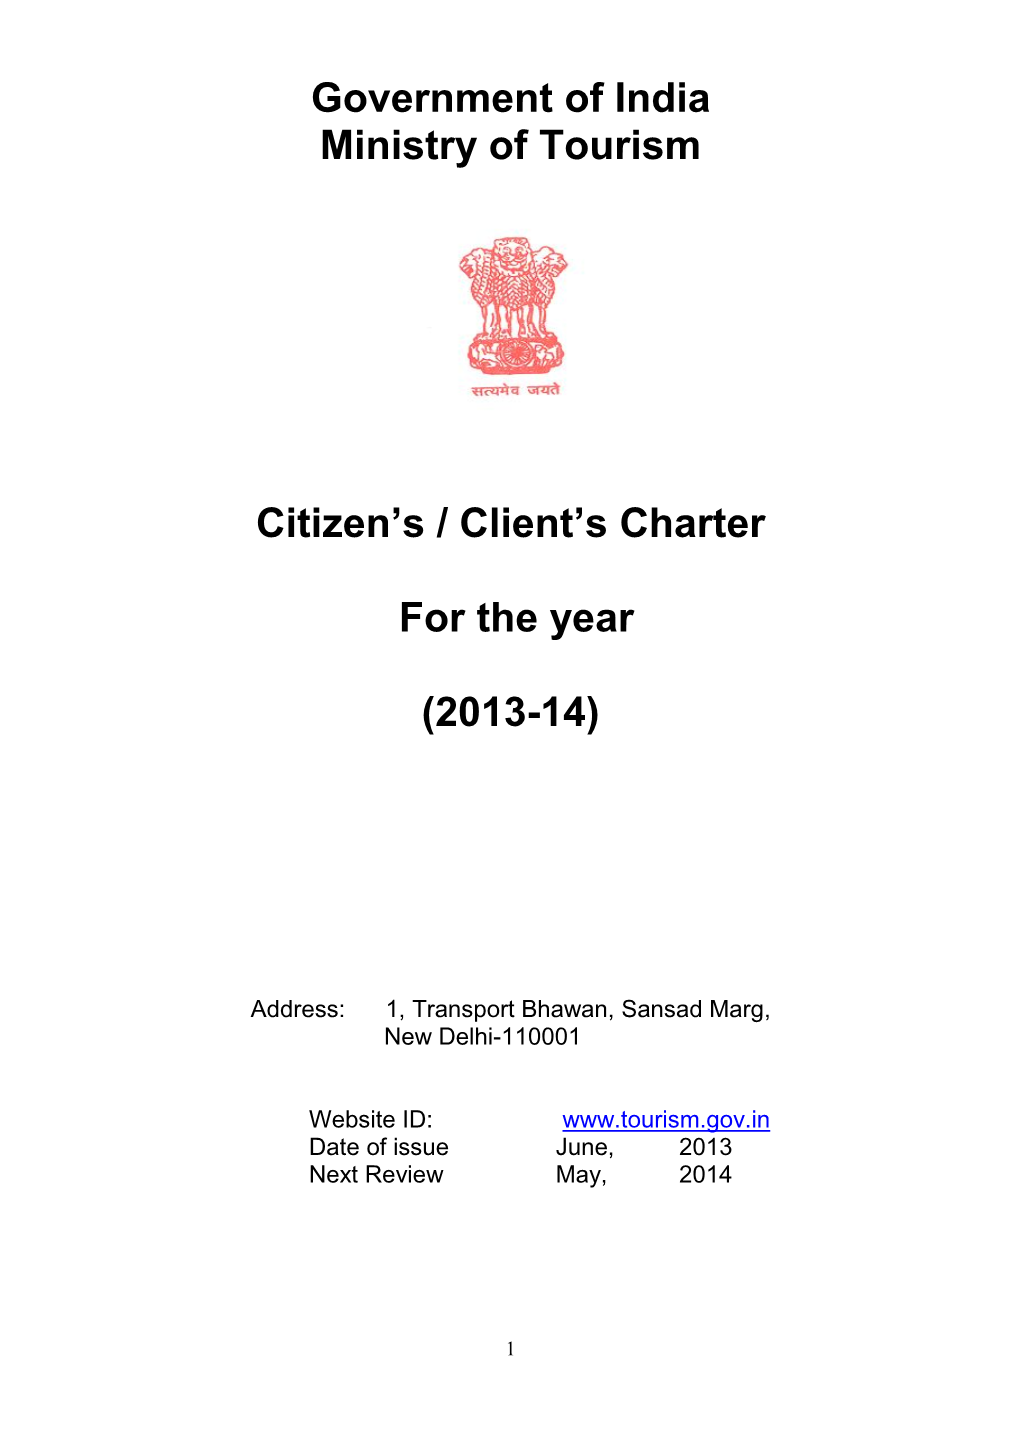 Government of India Ministry of Tourism Citizen's / Client's Charter